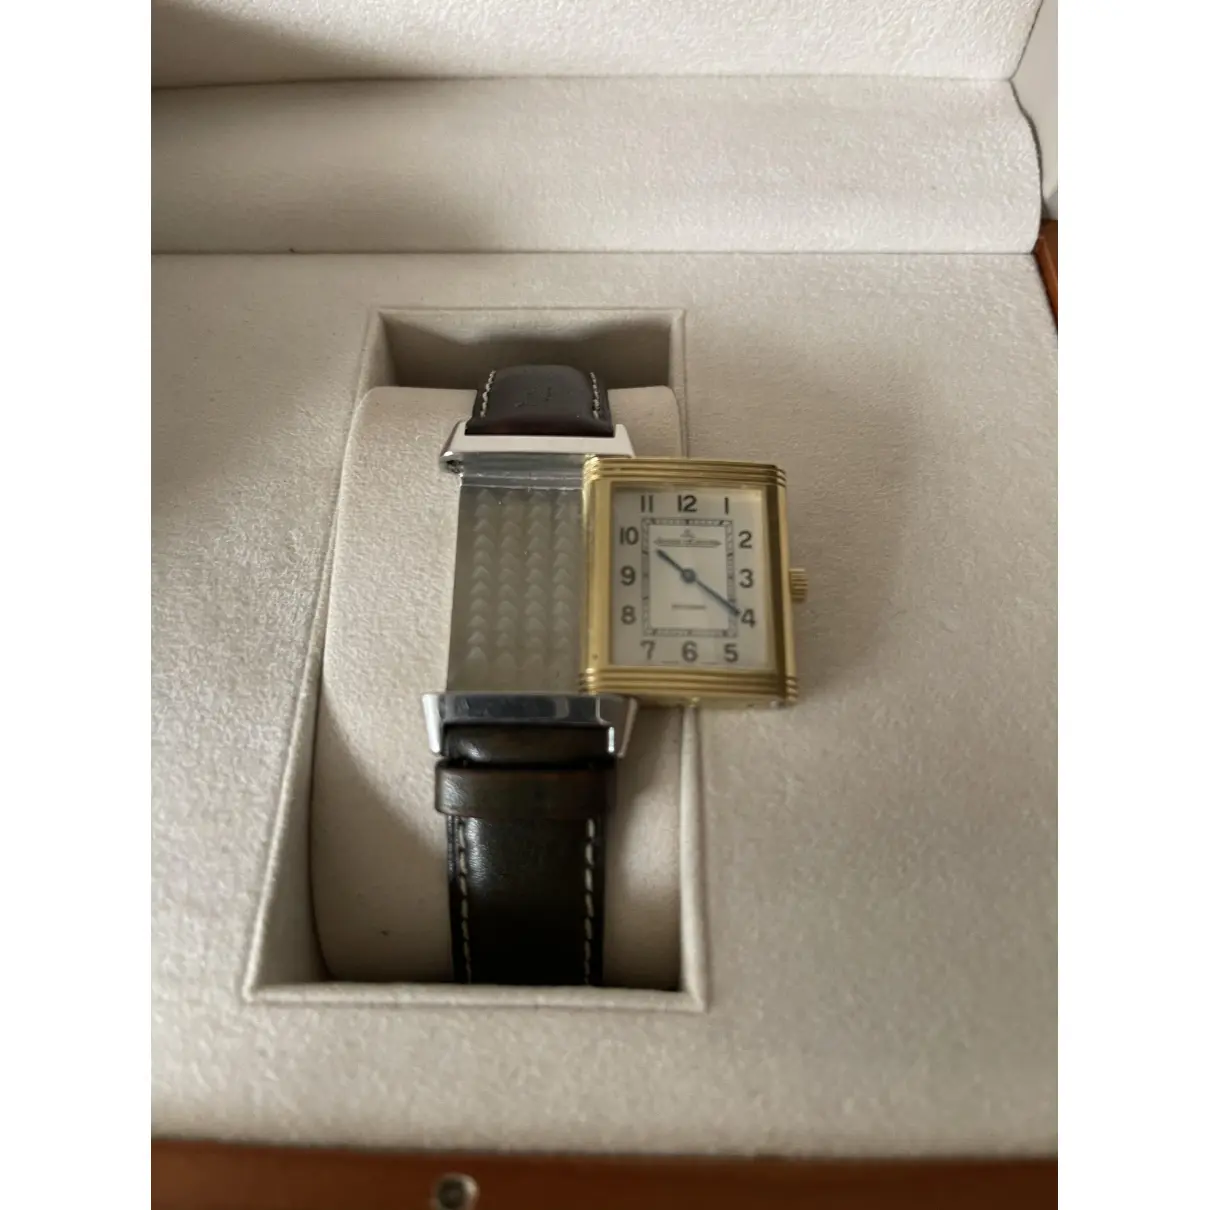 Reverso watch Jaeger-Lecoultre